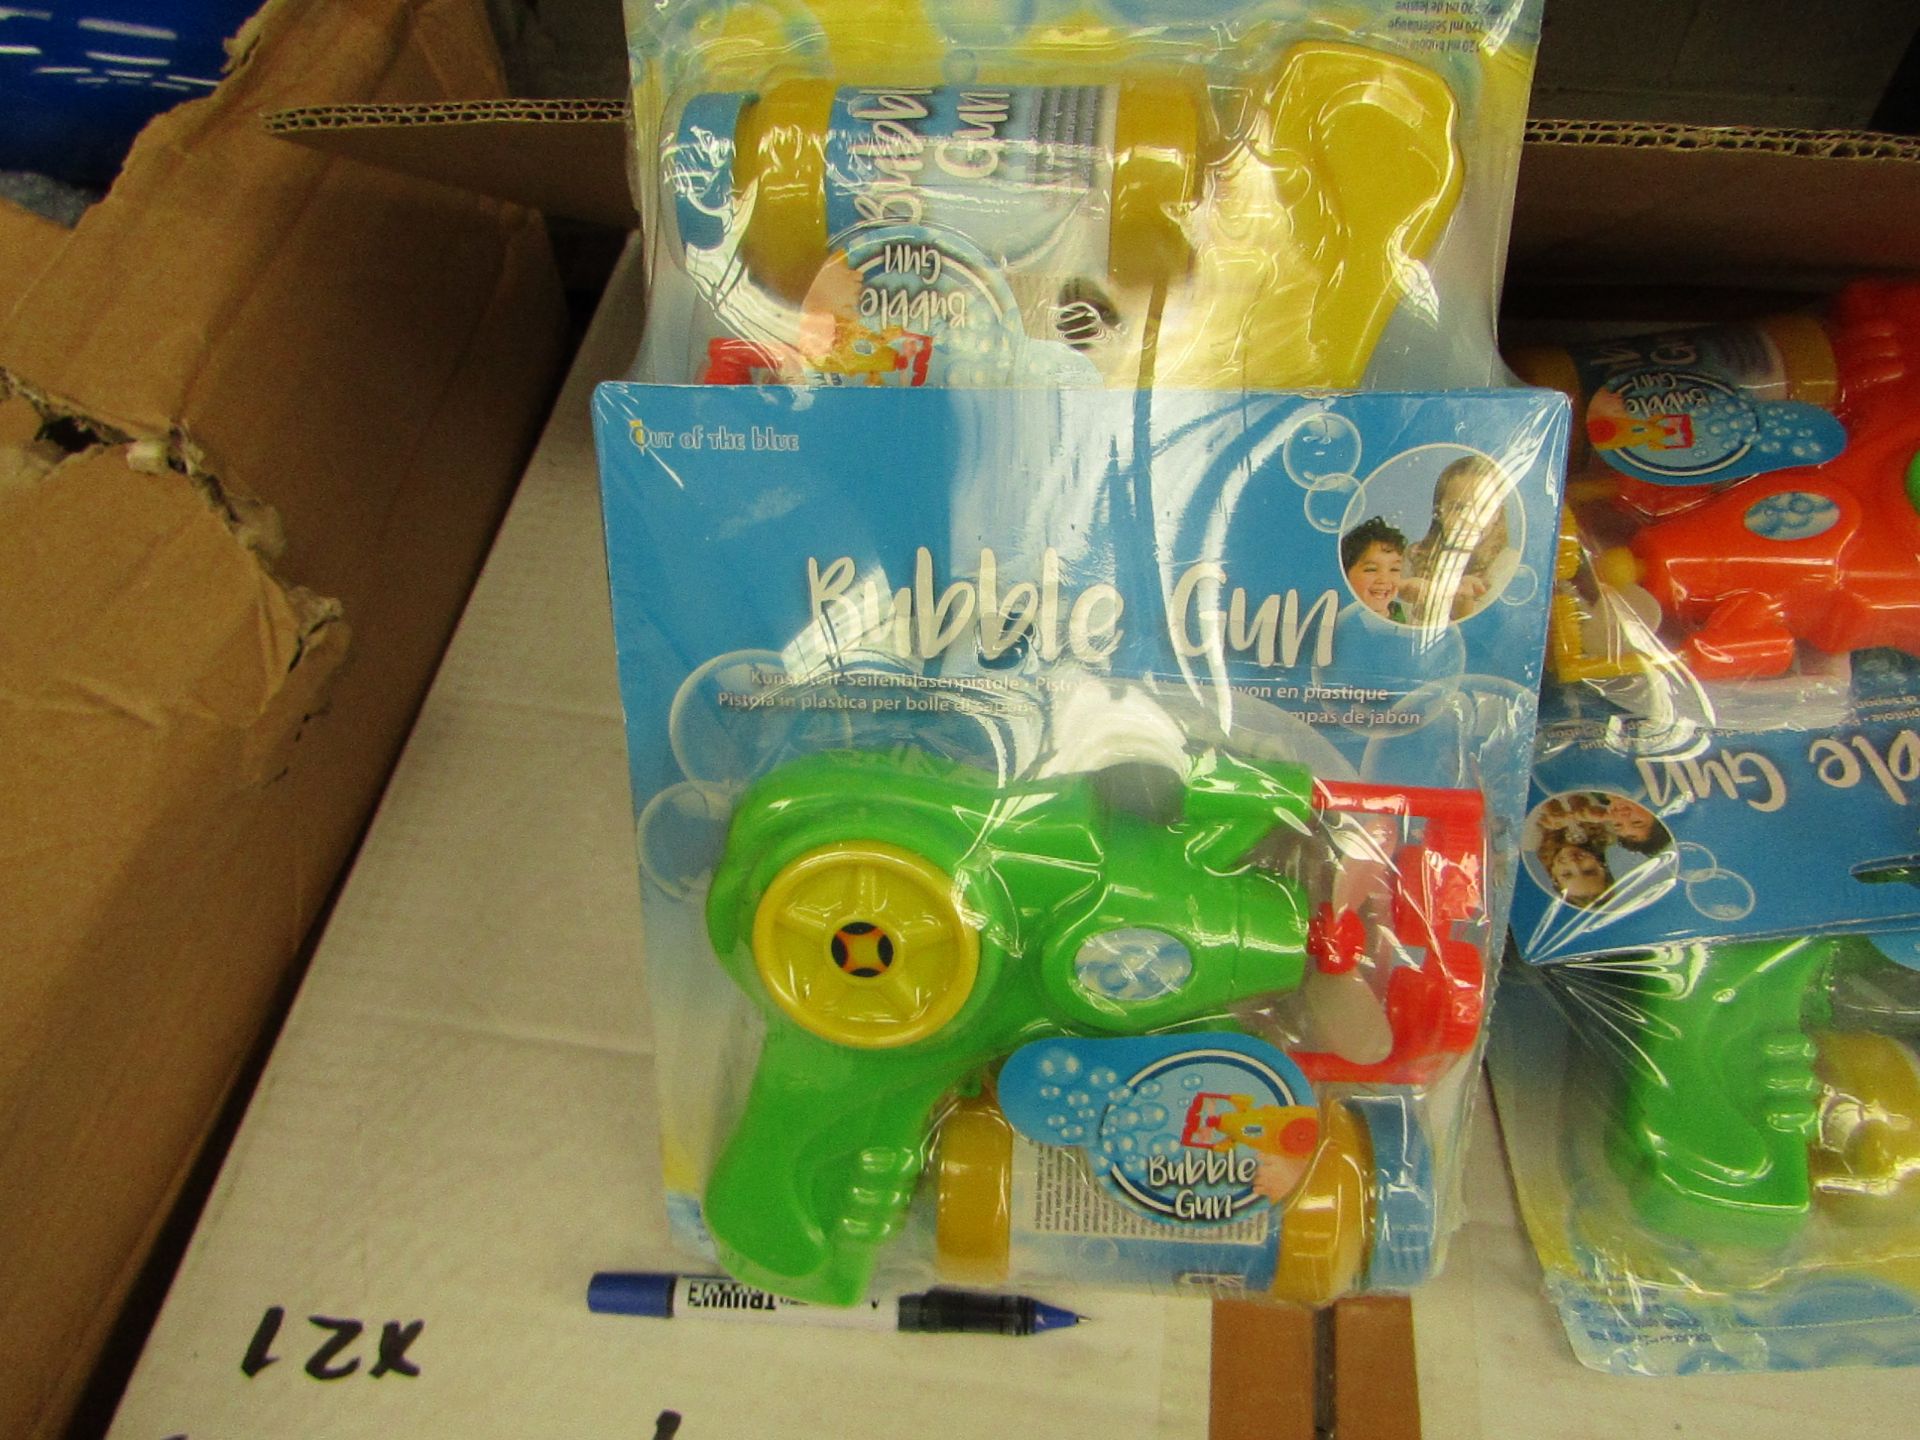 2x Packs of 3 Bubble Gun - With Bubble Liquid - New & Packaged.